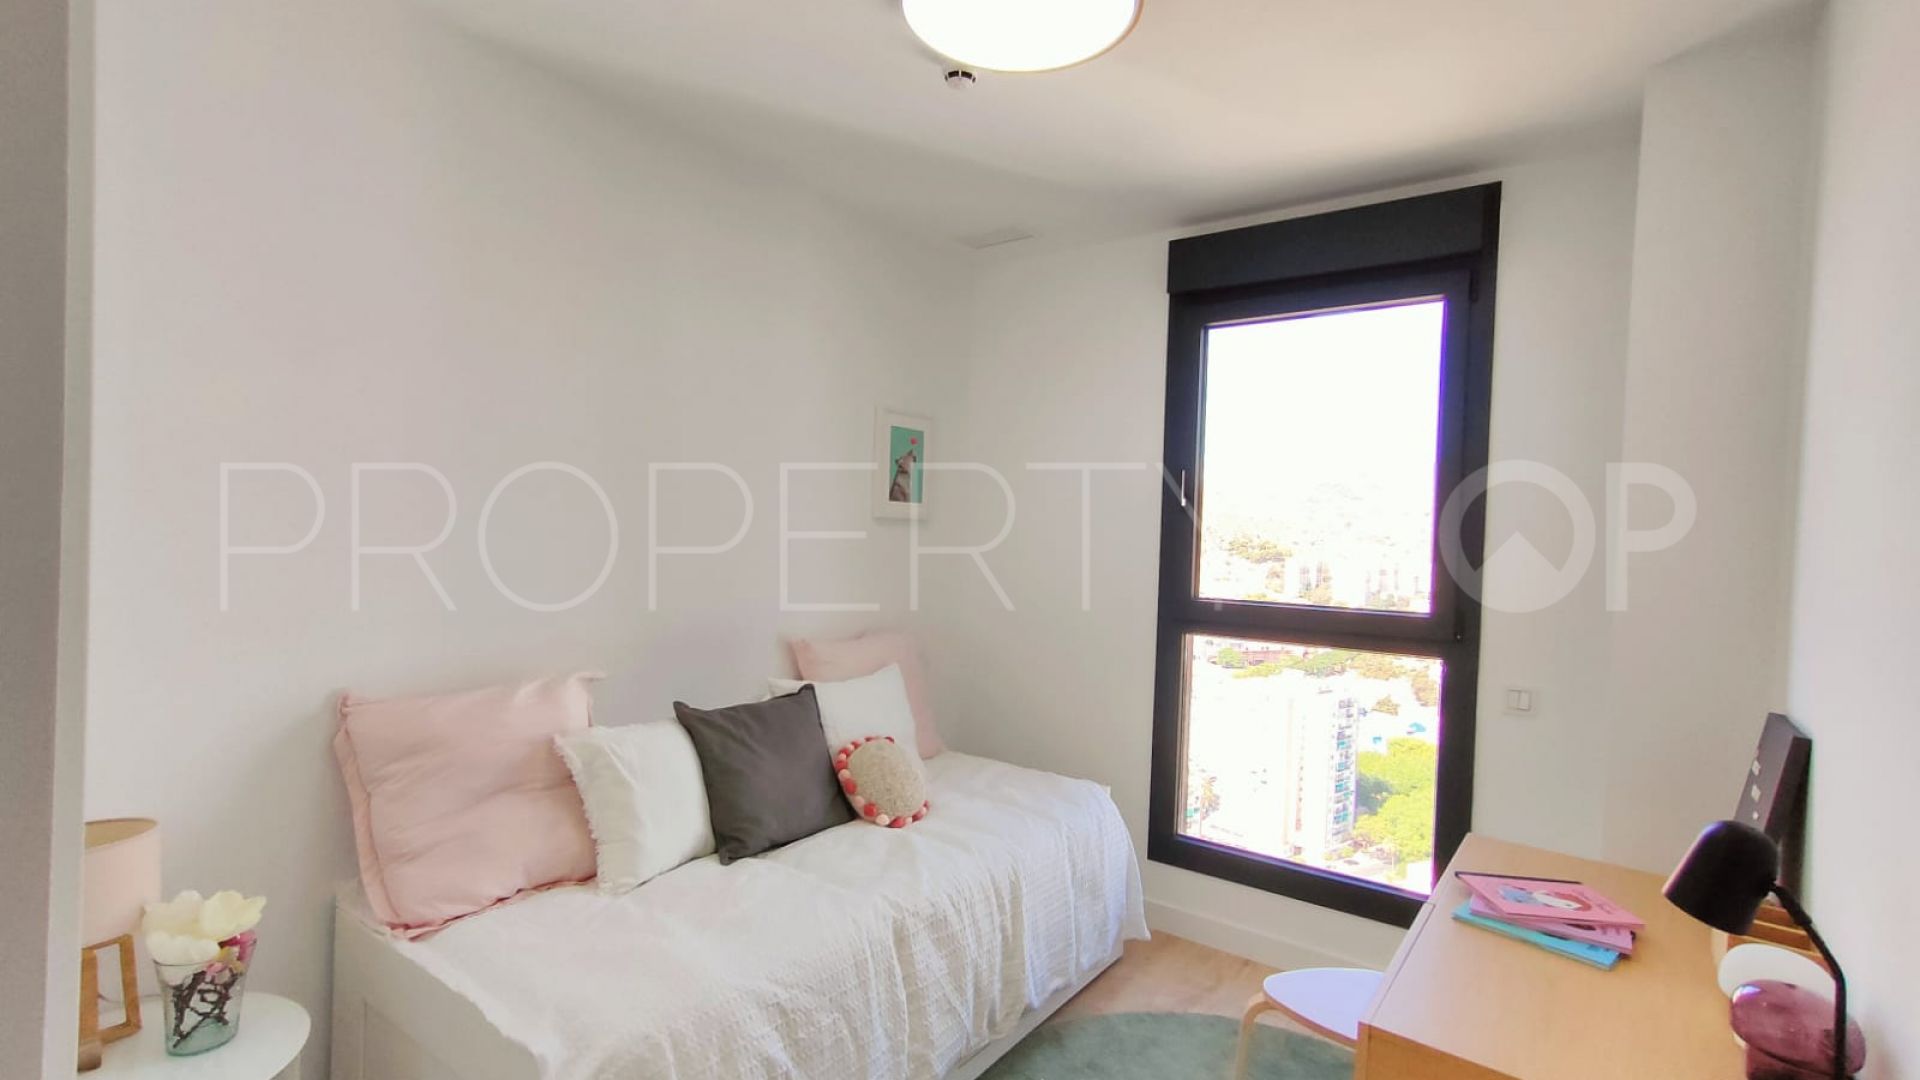 4 bedrooms Malaga penthouse for sale